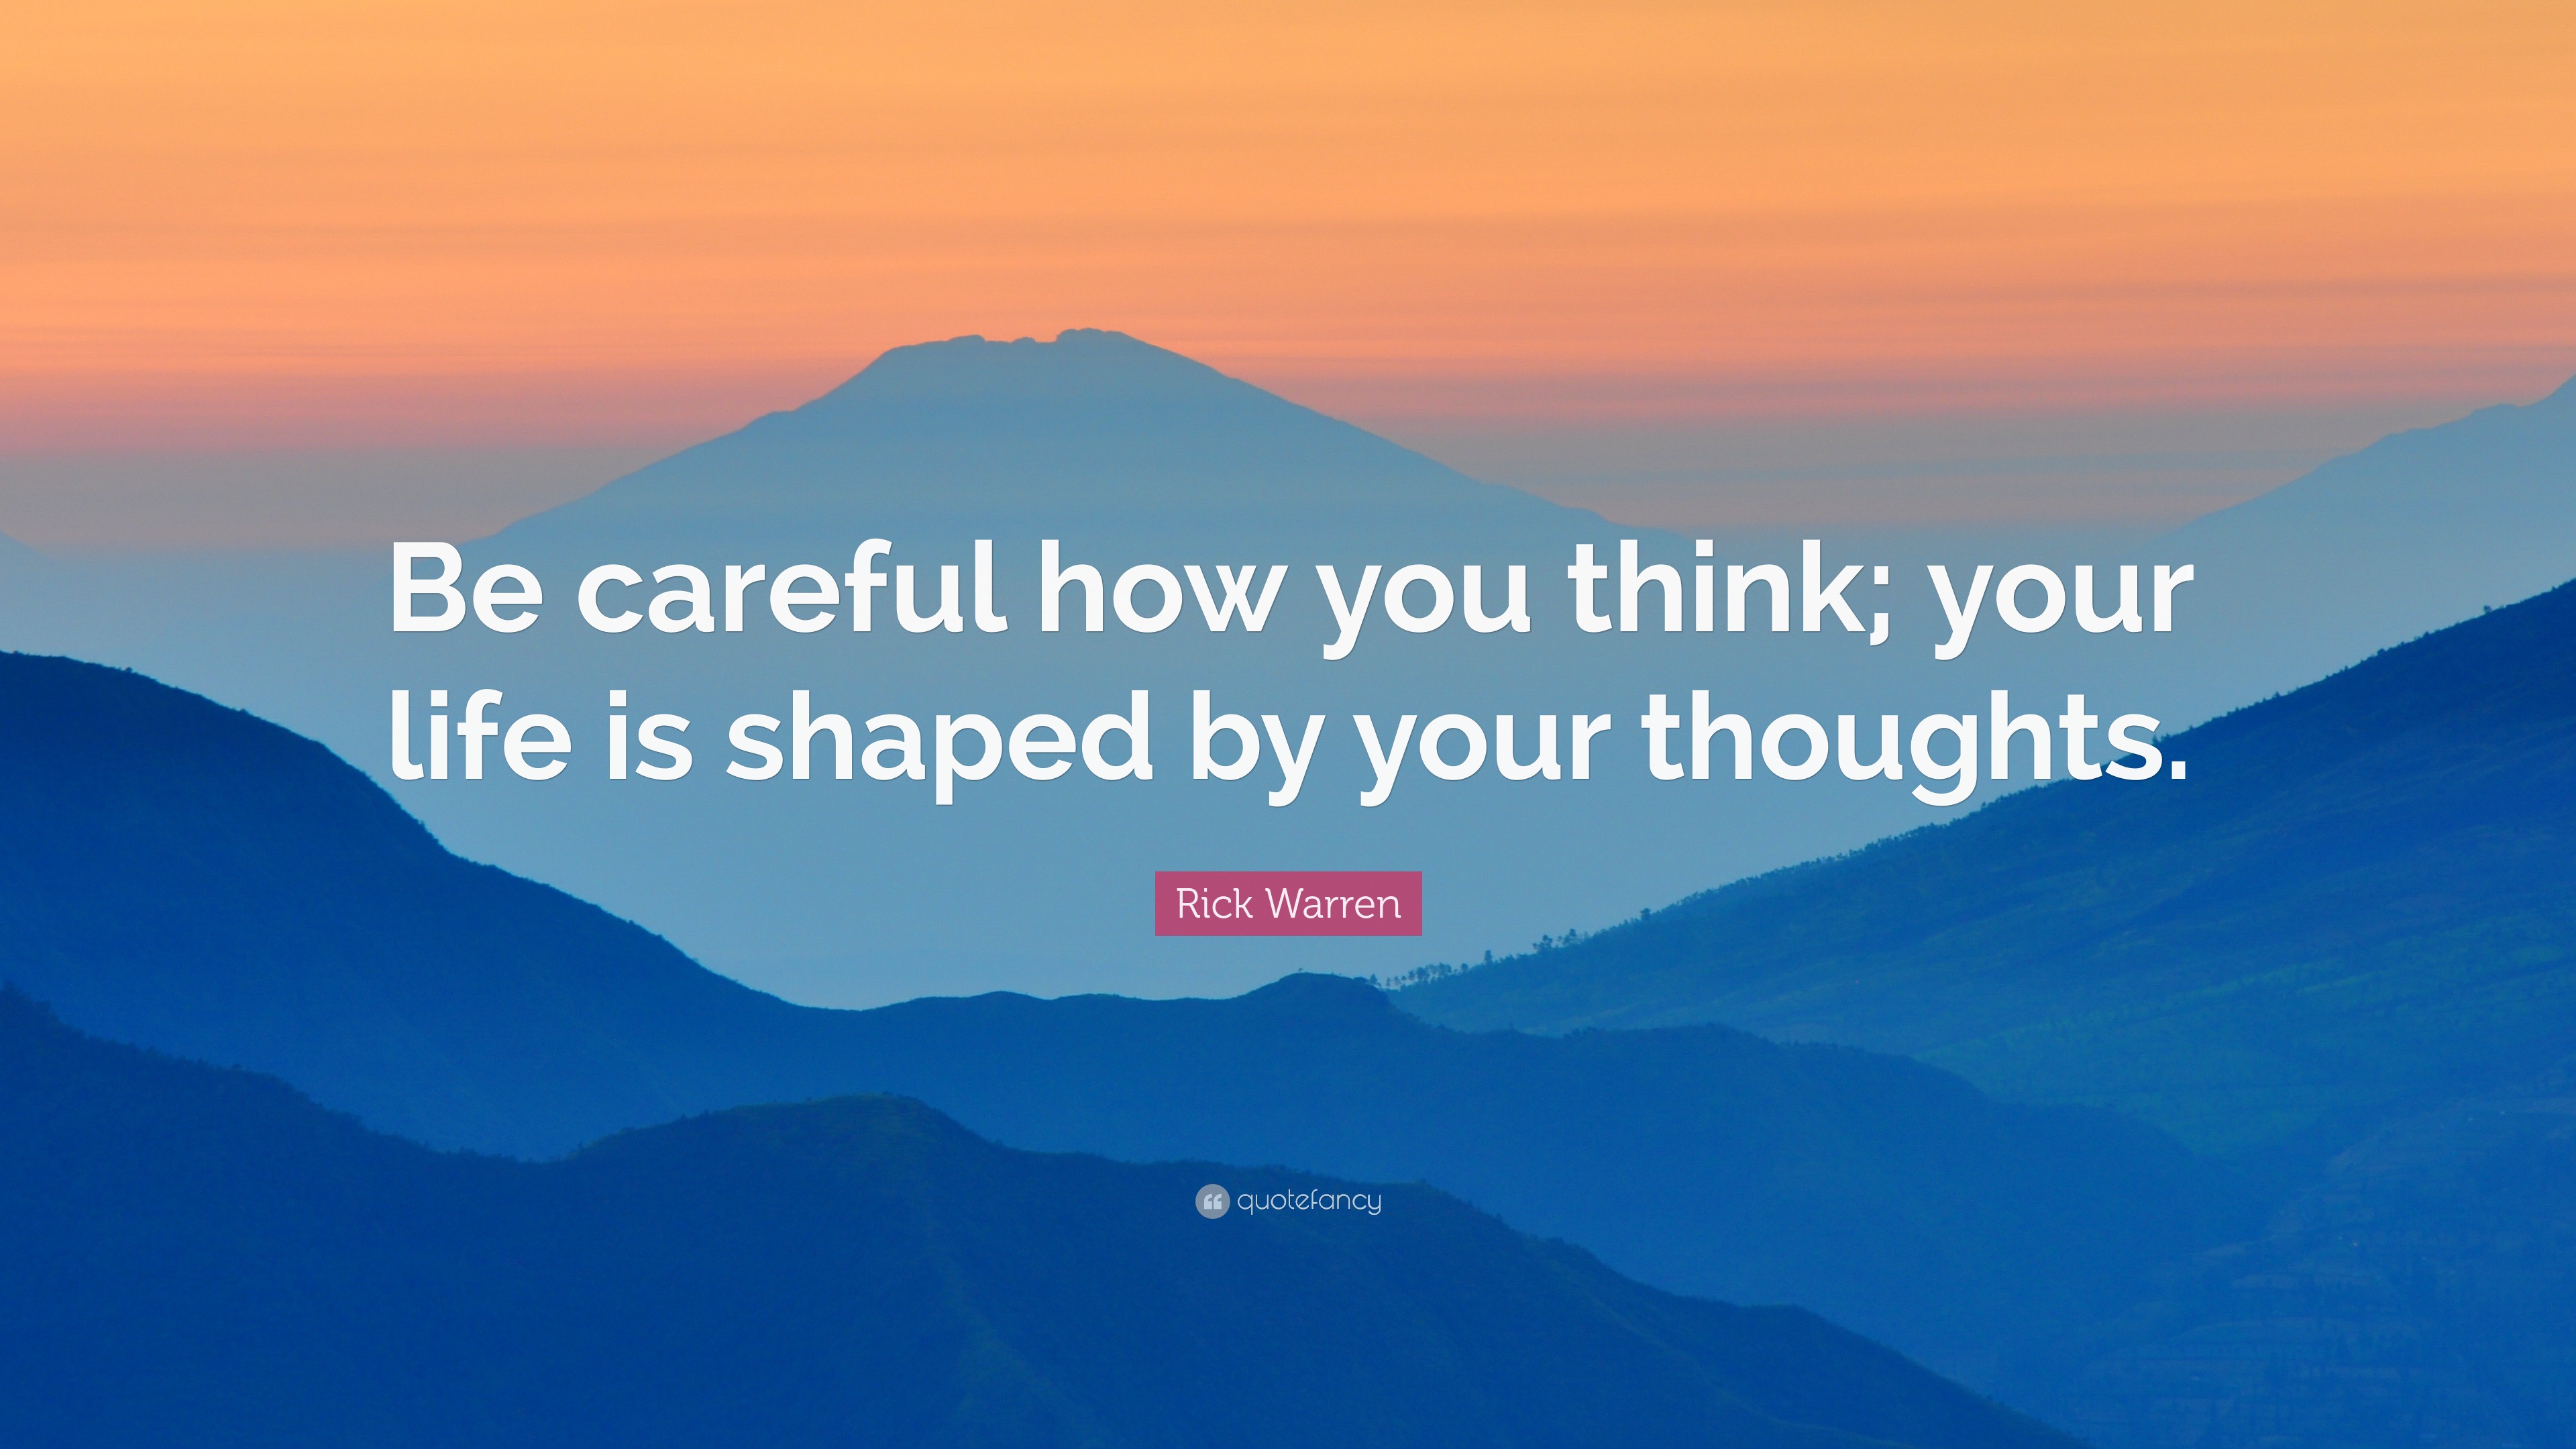 Rick Warren Quote “be Careful How You Think Your Life Is Shaped By Your Thoughts” 7409